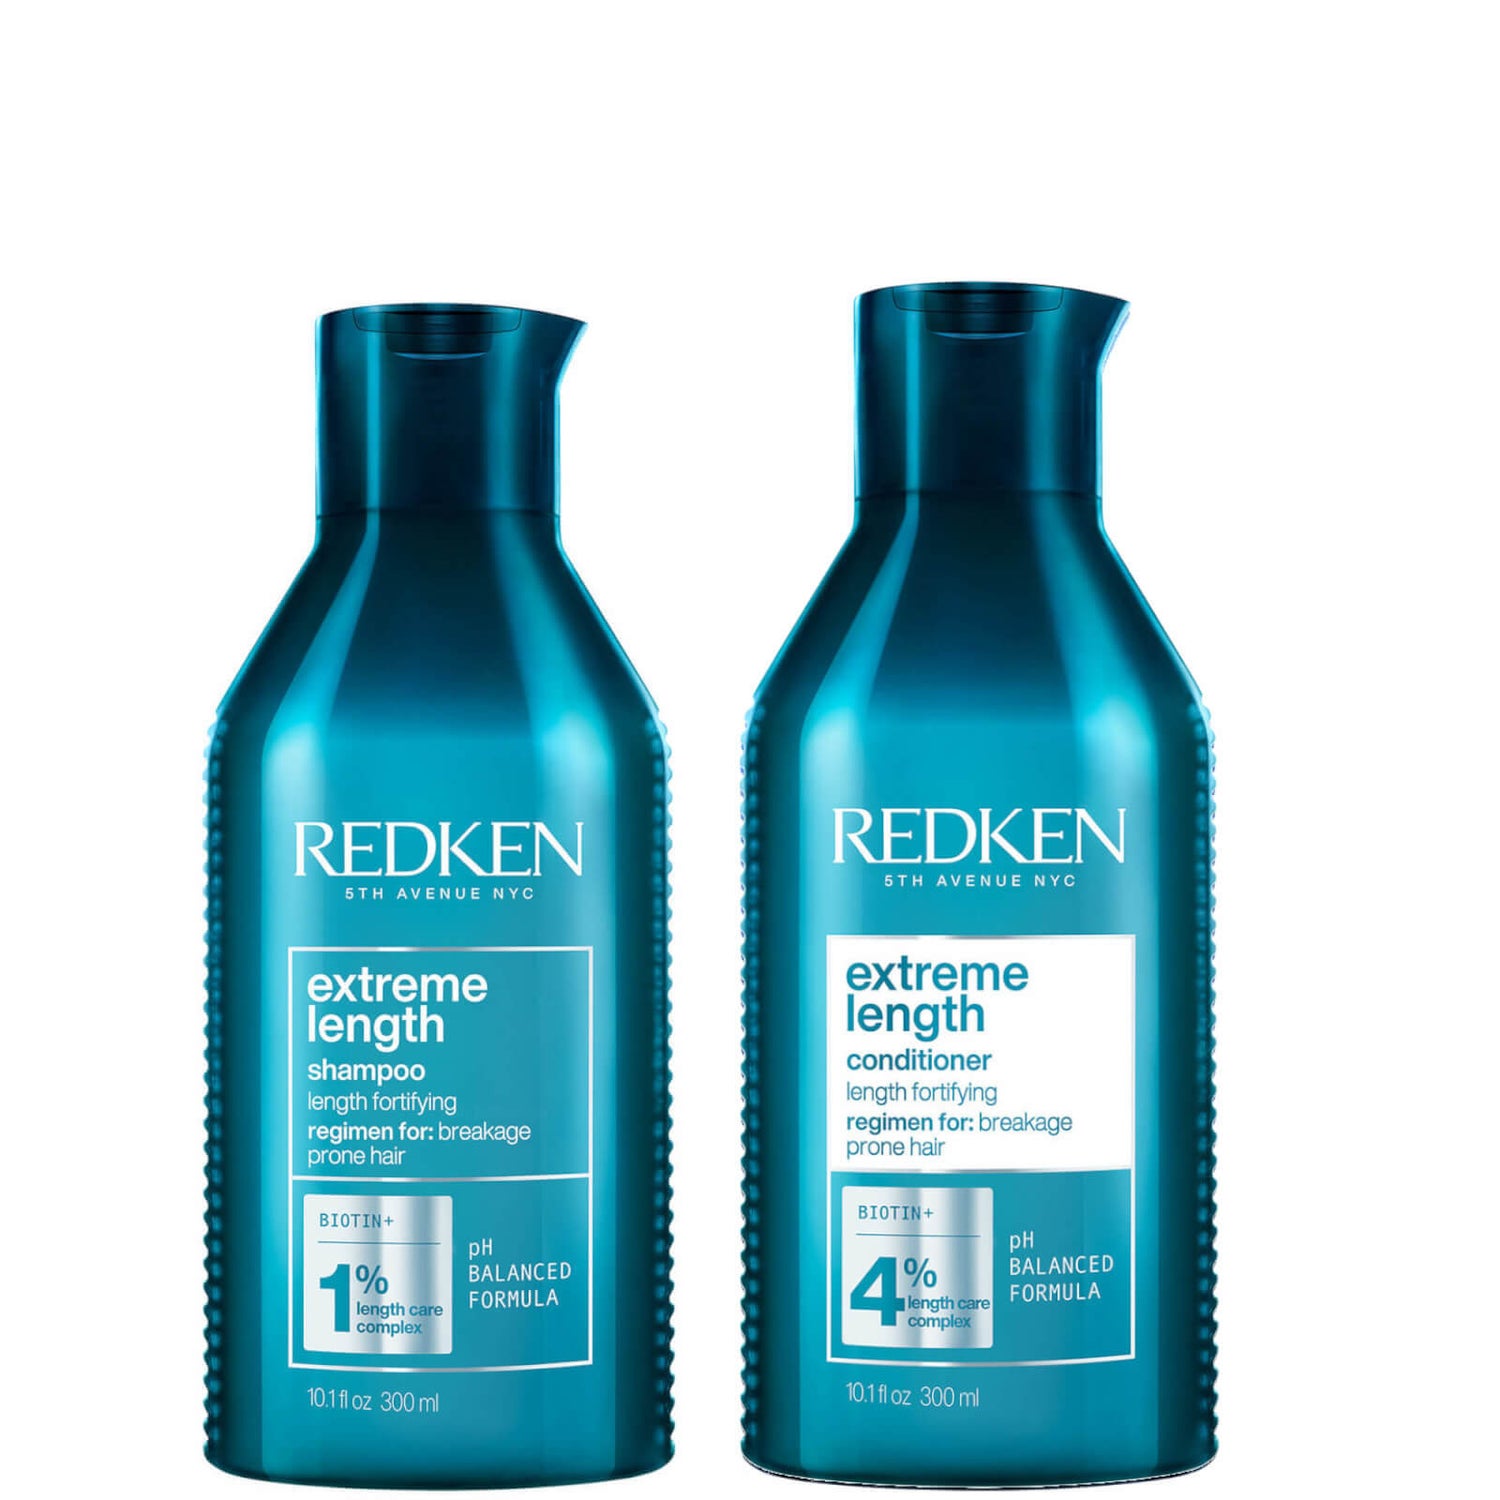 Redken Extreme Length Shampoo & Conditioner Duo